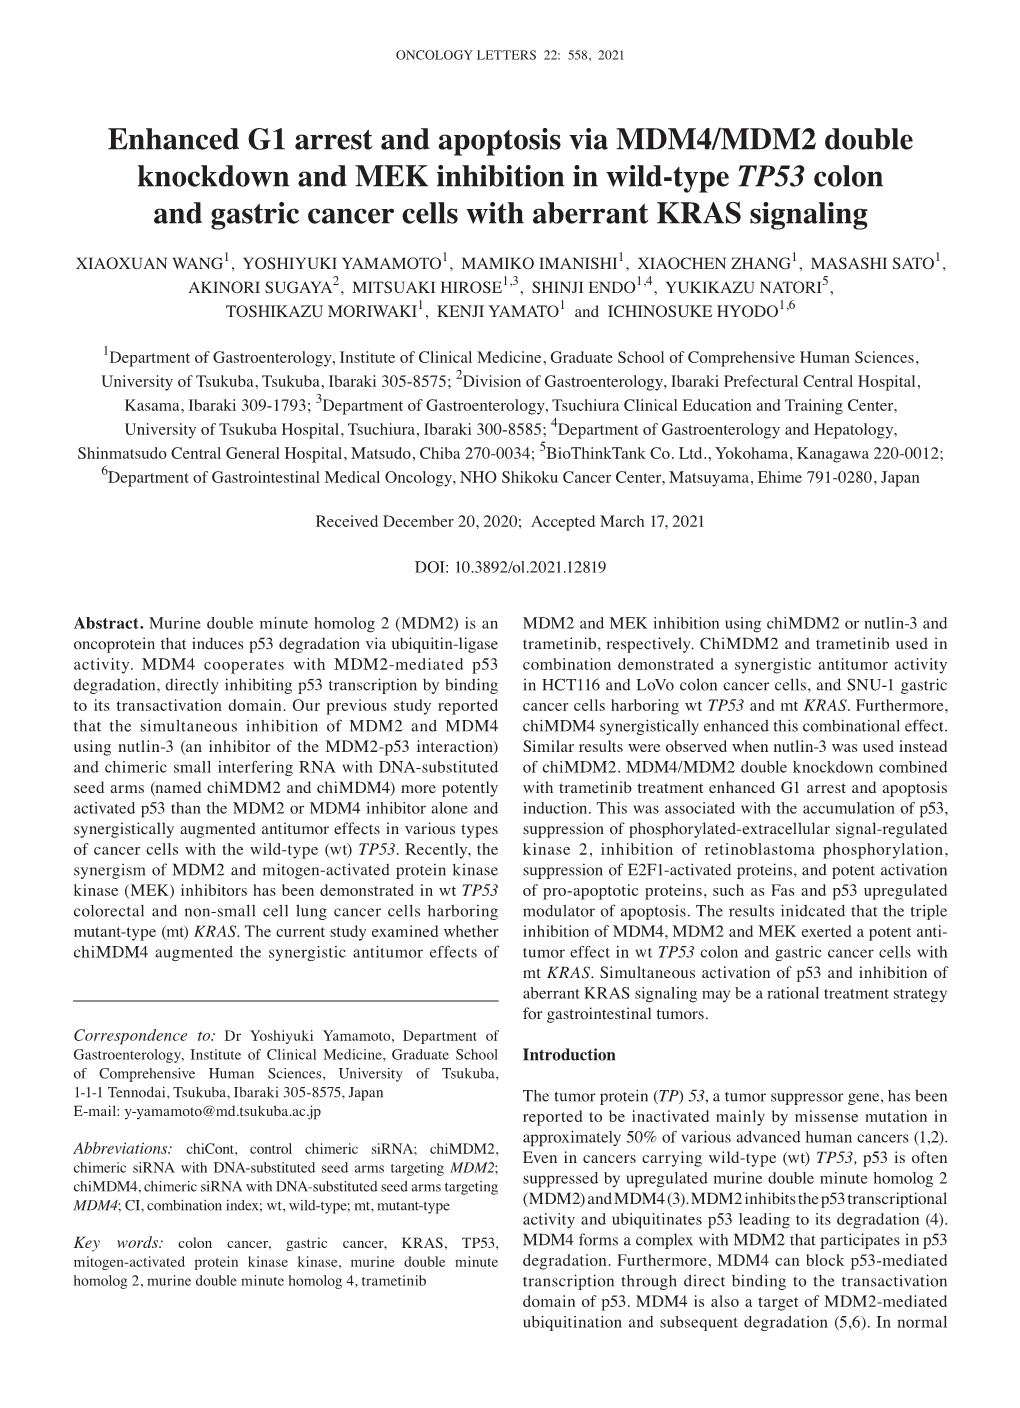 Enhanced G1 Arrest and Apoptosis Via MDM4/MDM2 Double Knockdown and MEK Inhibition in Wild‑Type TP53 Colon and Gastric Cancer Cells with Aberrant KRAS Signaling